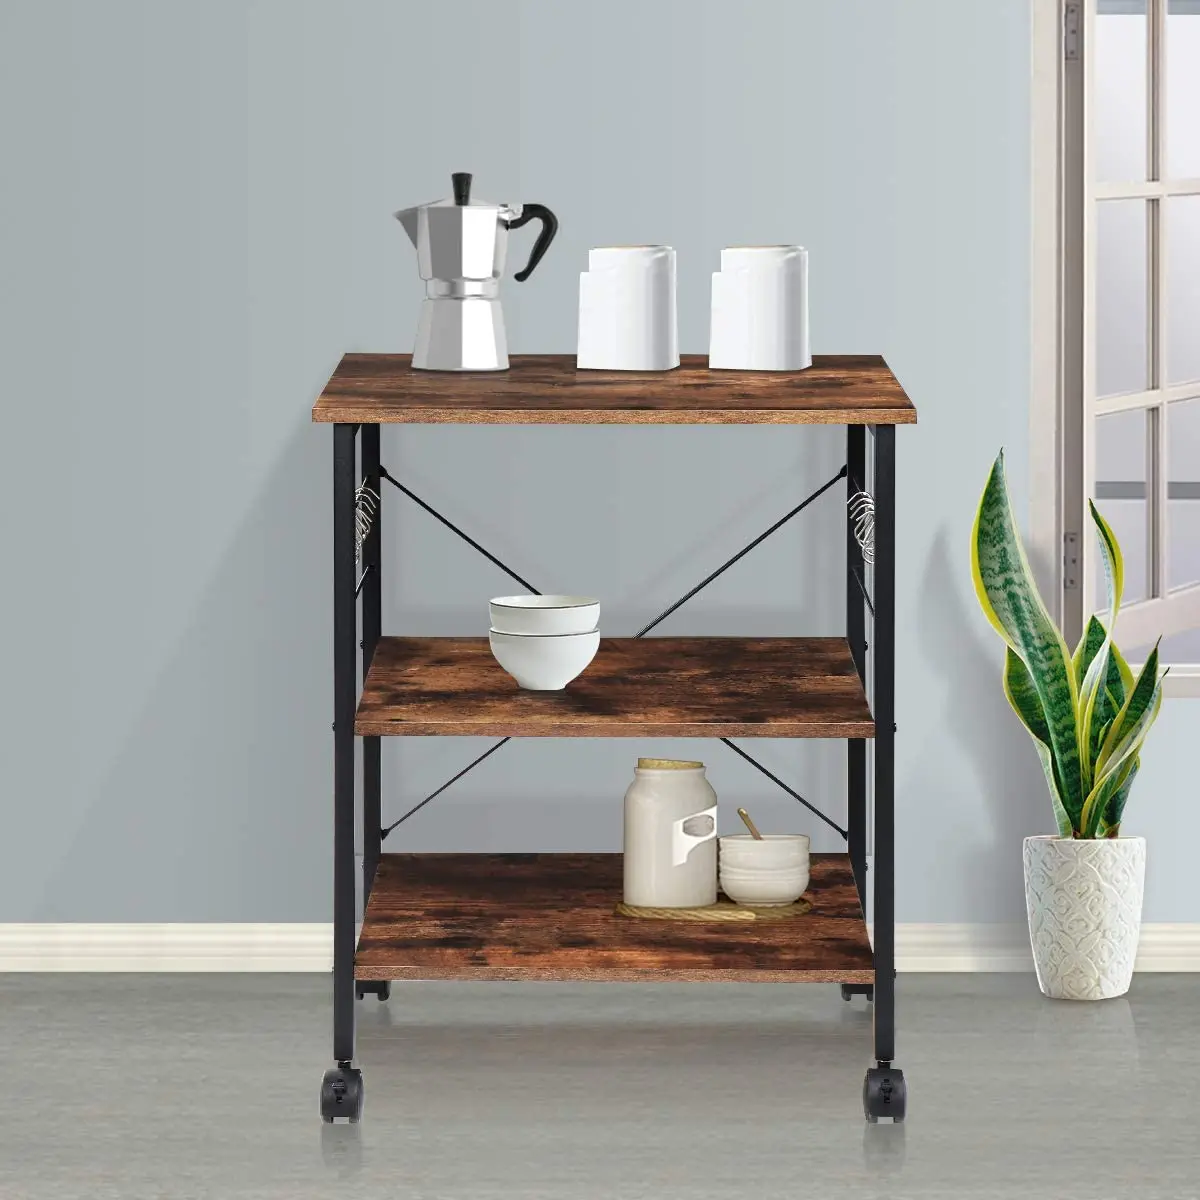 3 Tier Kitchen Storage Cart Microwave Oven Rack For Household Kitchen Wheel Movable Multifunctional Storage Holders  Cart